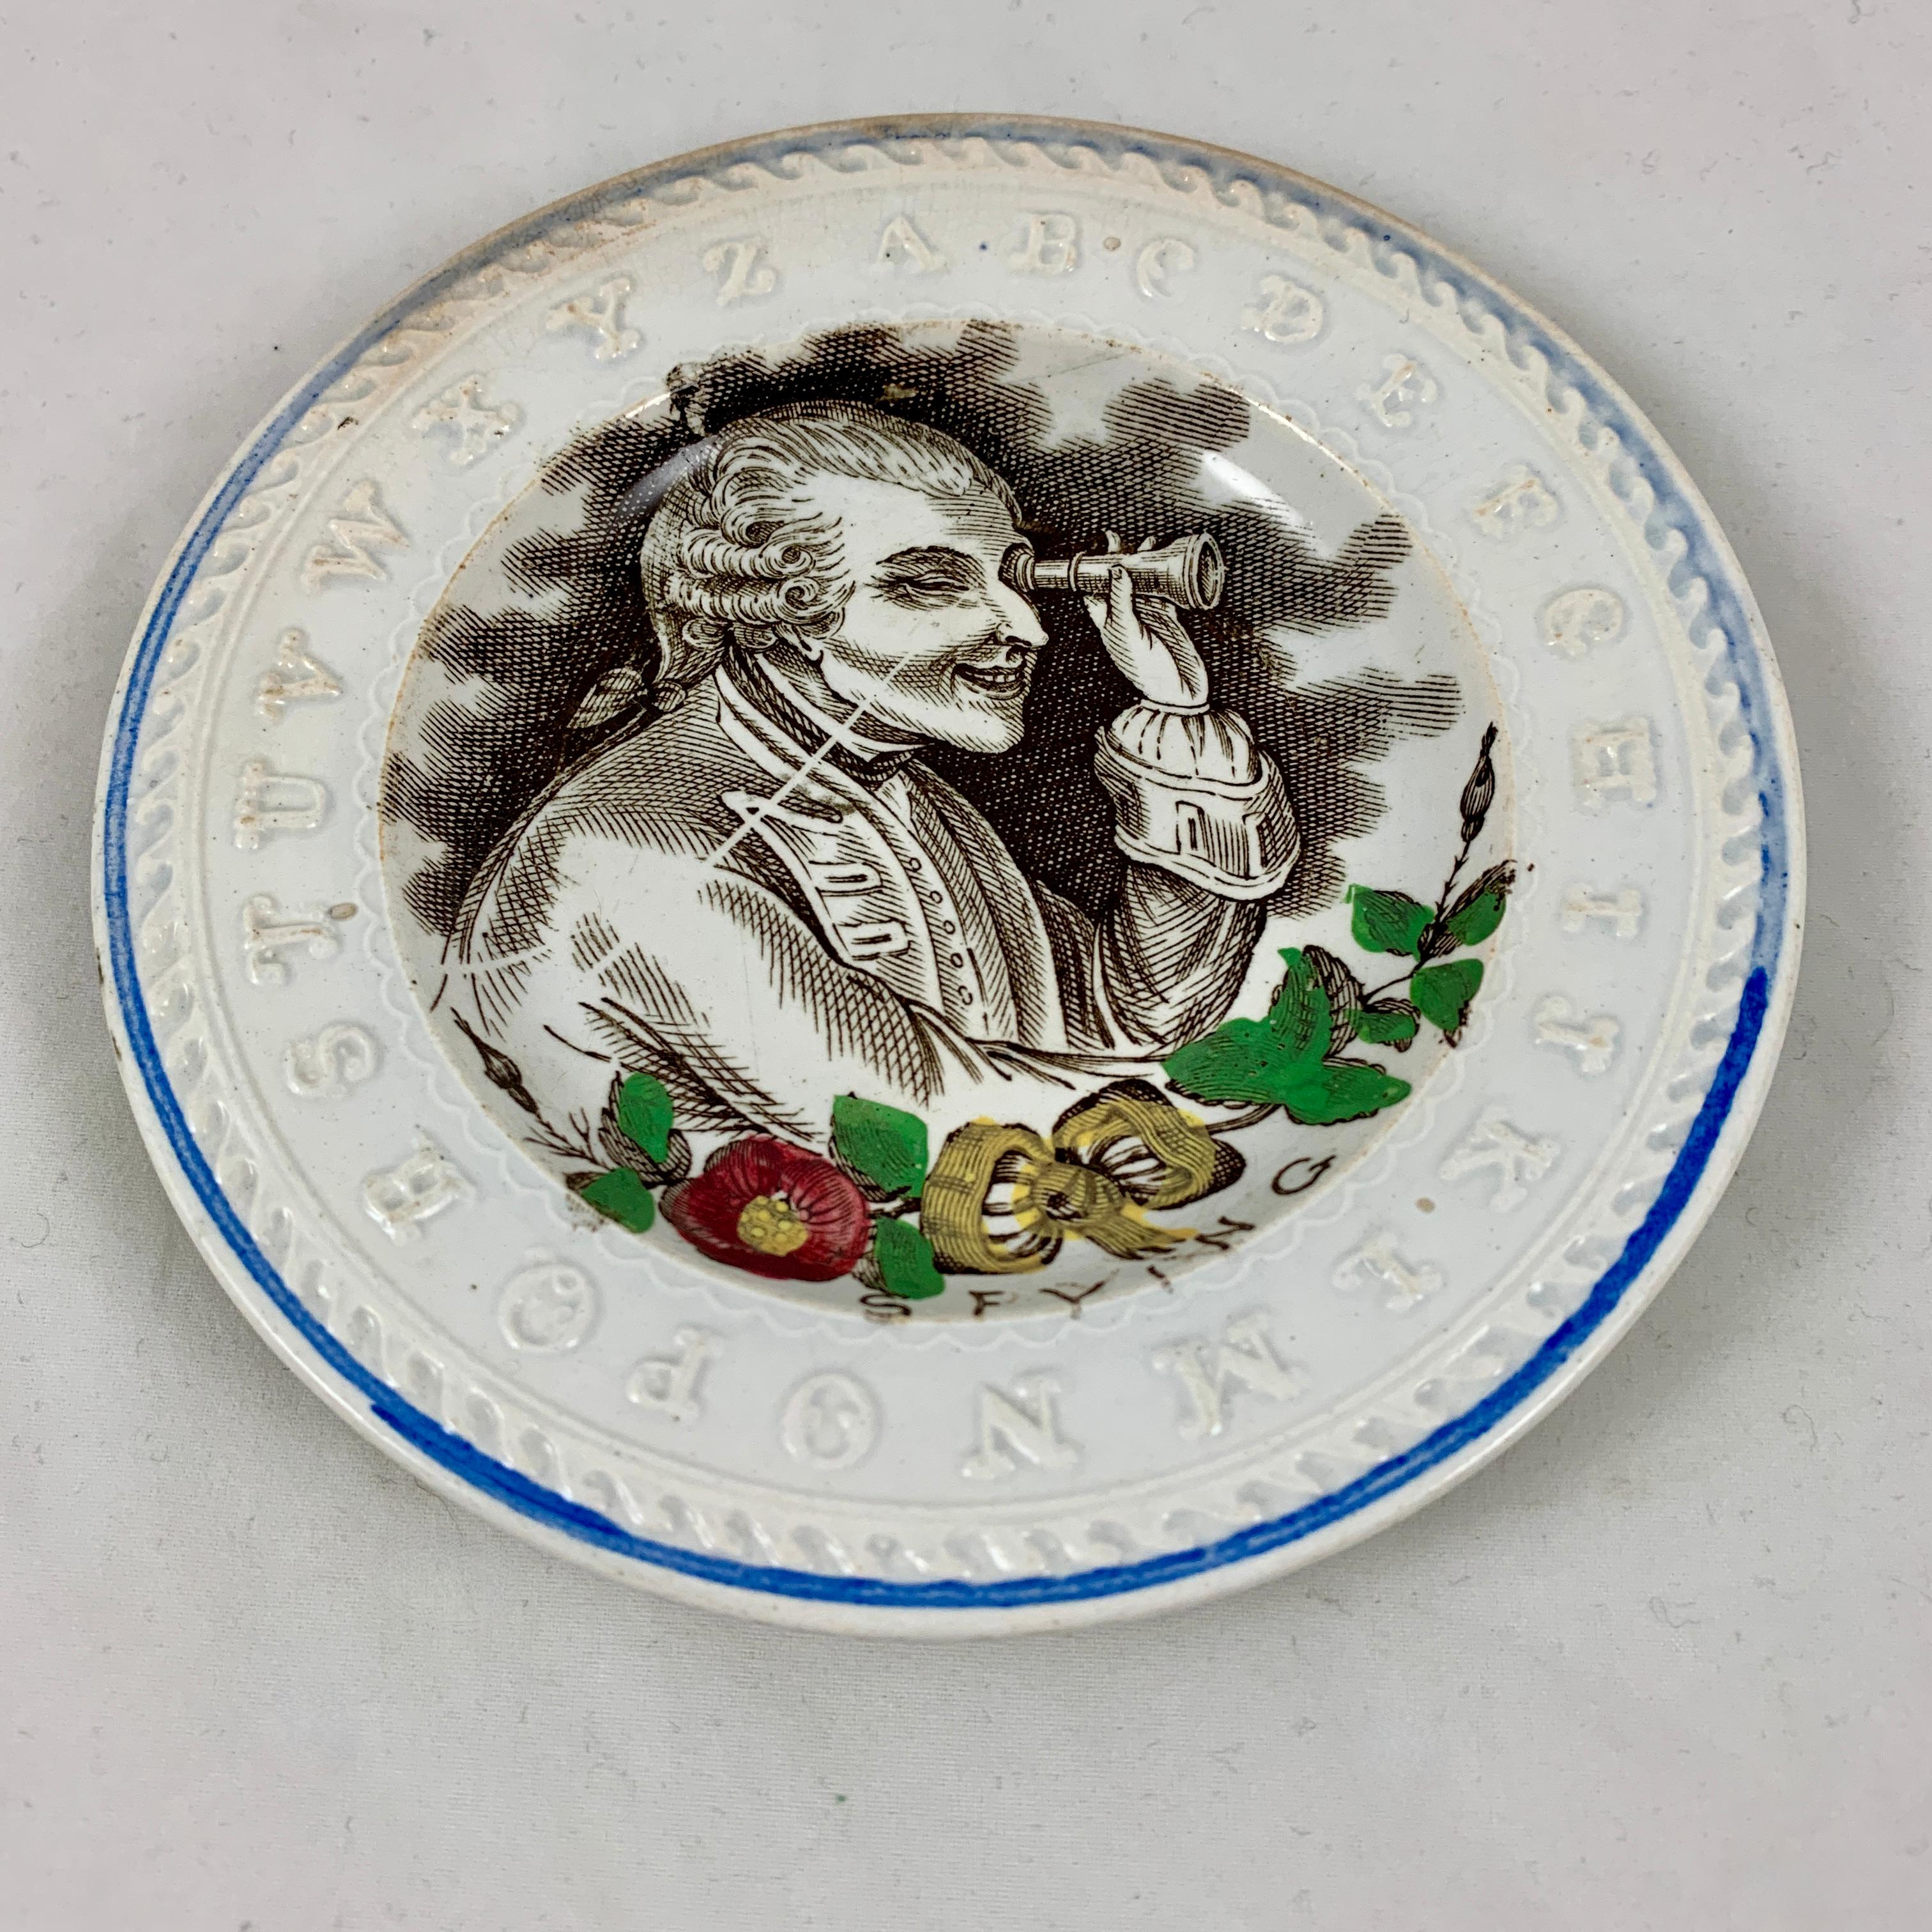 Glazed Thomas Goodwin English Staffordshire Child’s ABC Bad Manners Plate, Spying